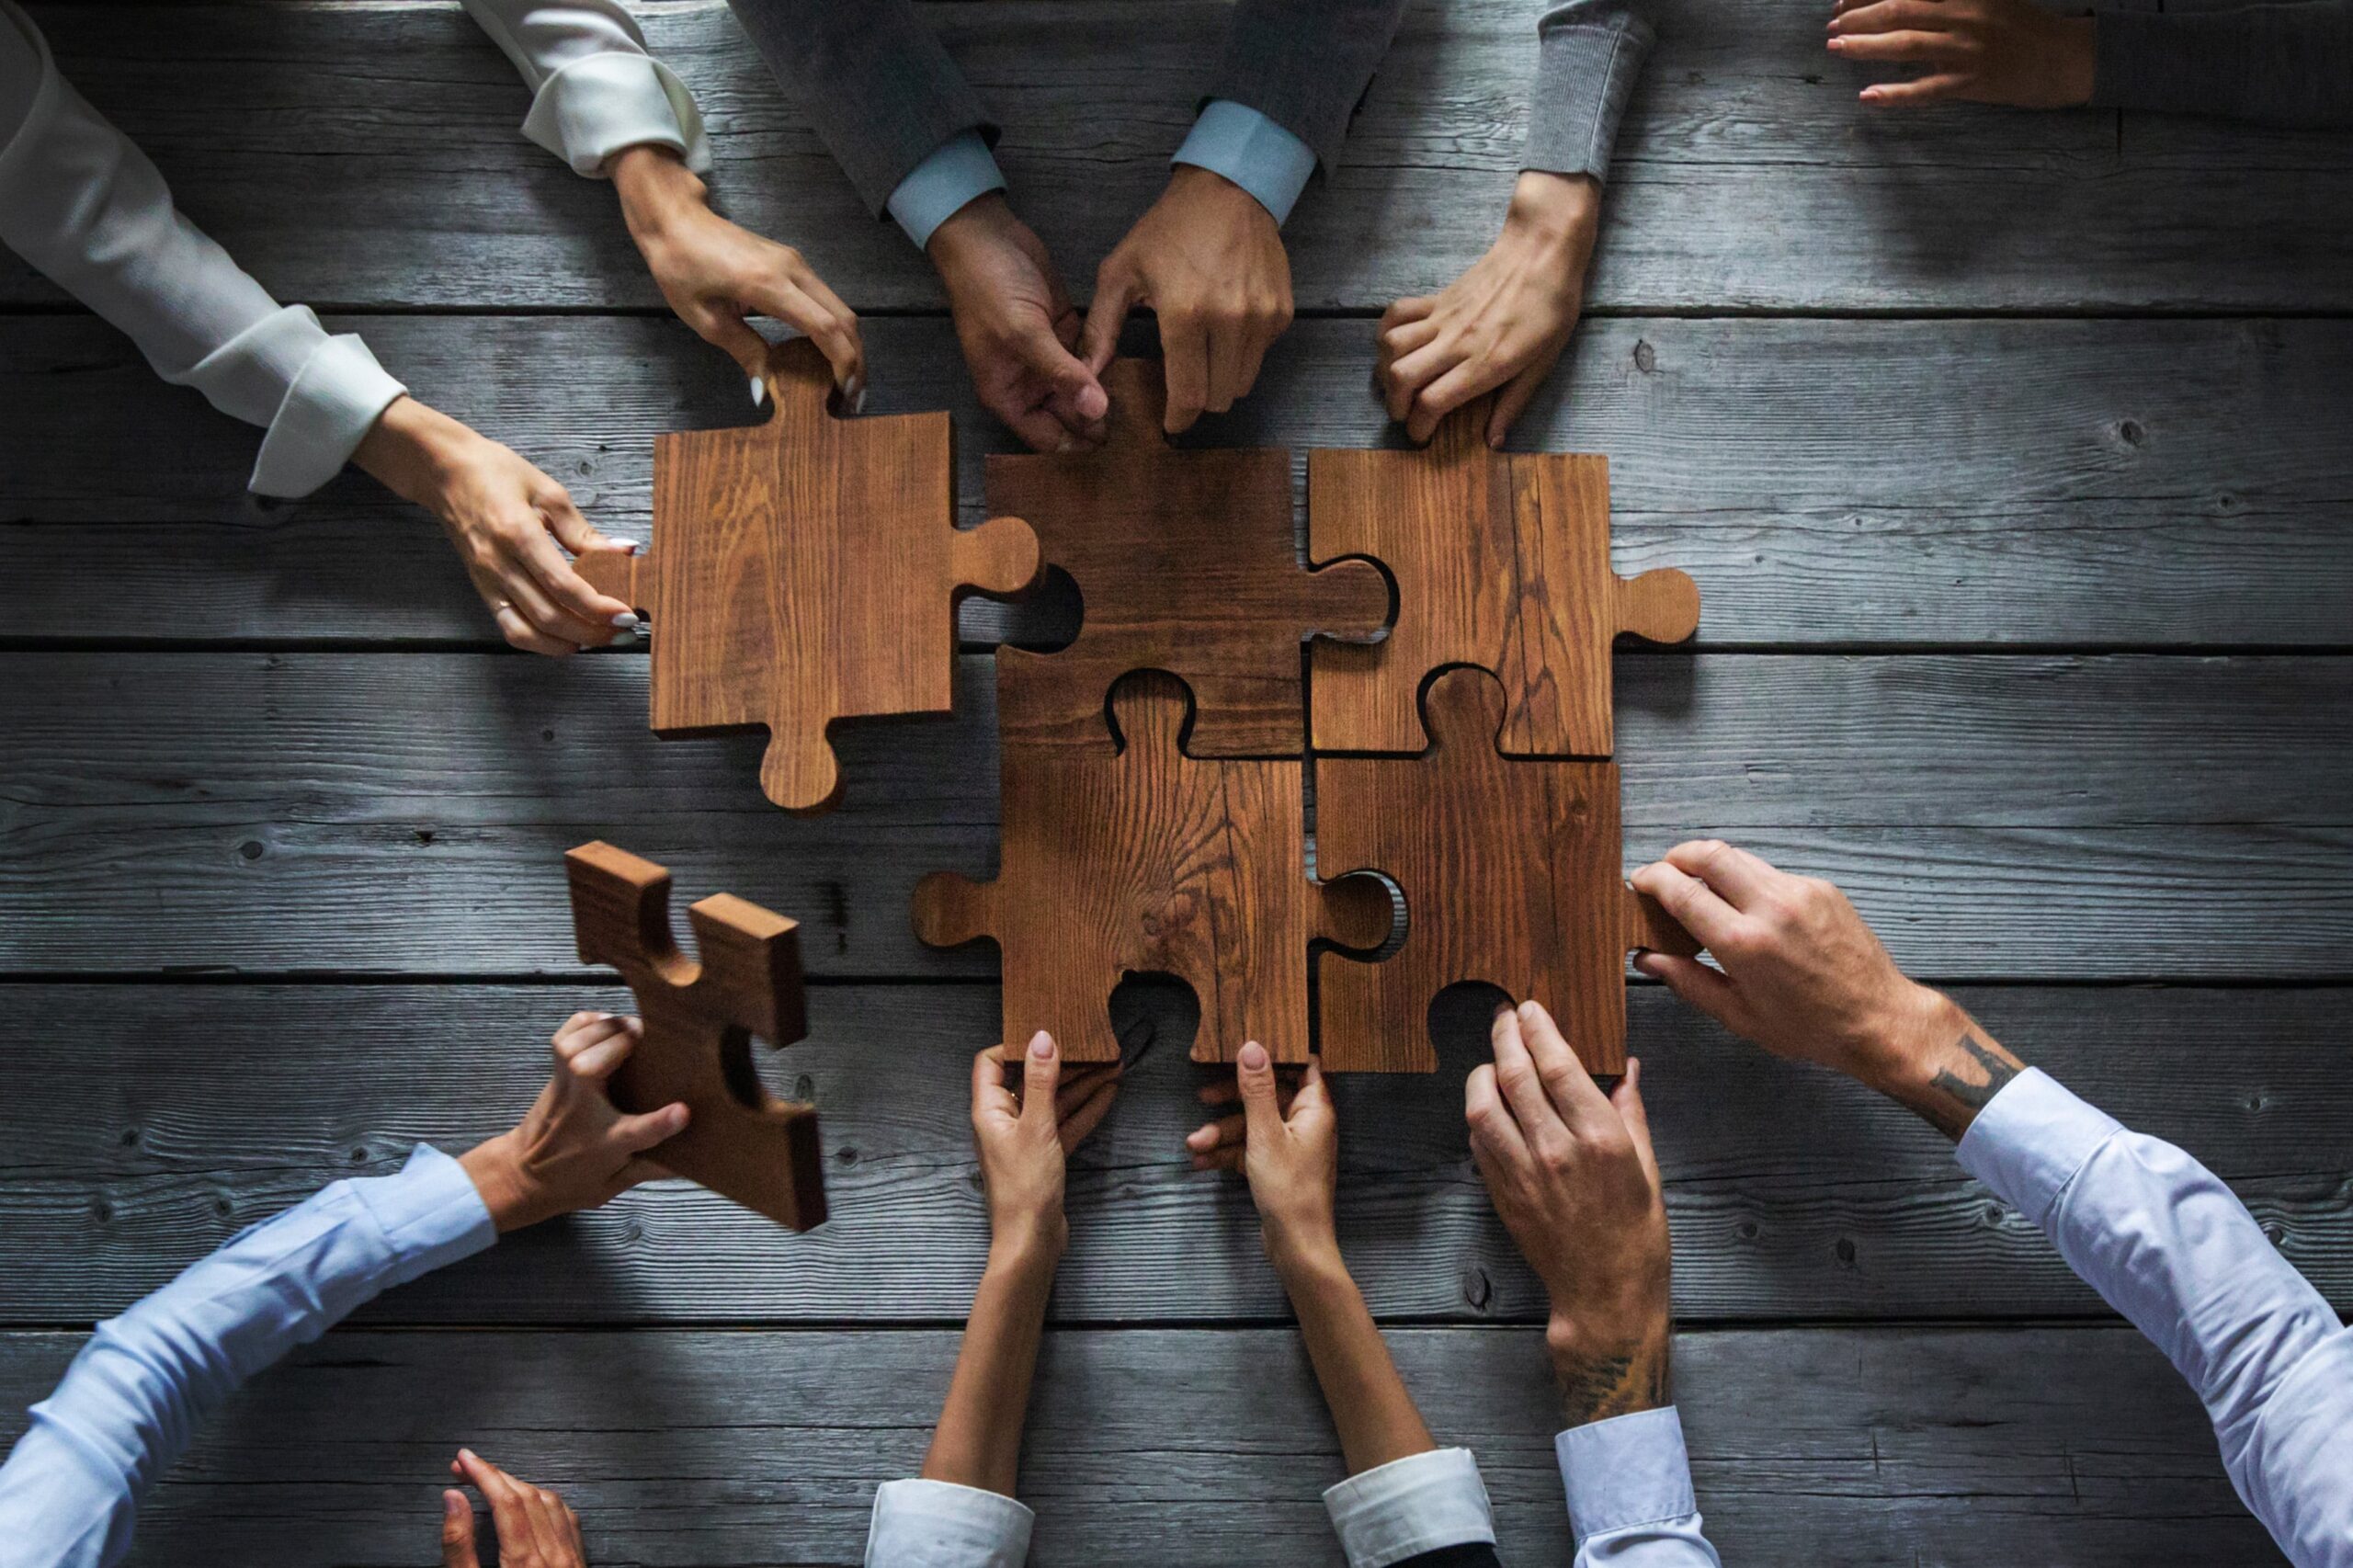 https://doradcy365.pl/wp-content/uploads/2022/12/business-people-team-sitting-around-meeting-table-and-assembling-wooden-jigsaw-puzzle-pieces-unity-cooperation-ideas-concept-min-scaled.jpg